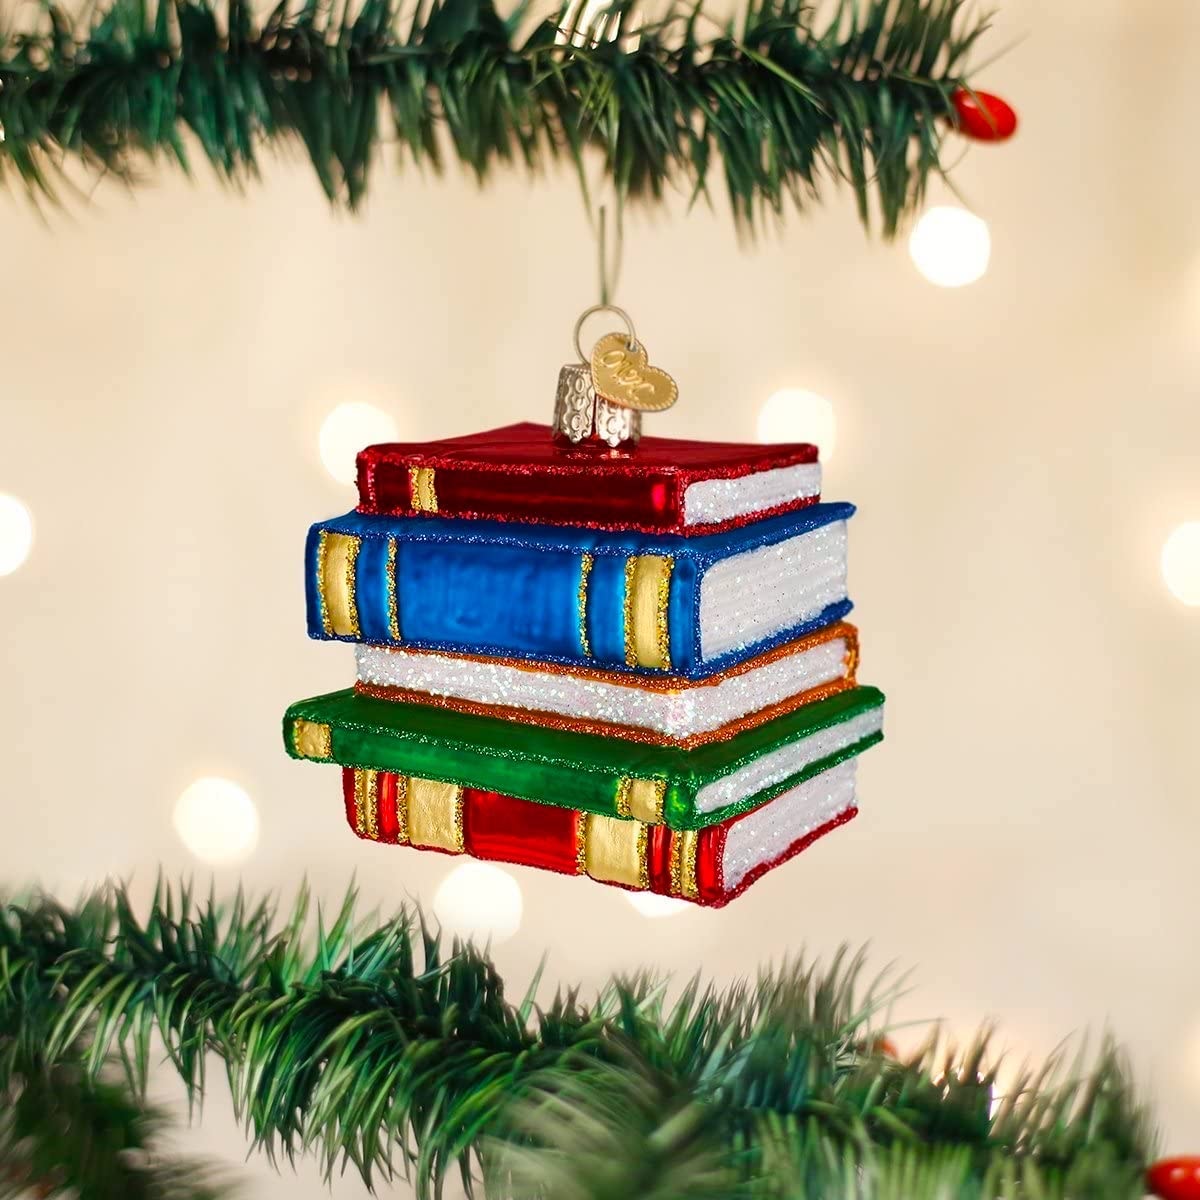 Fesive Christmas Stack of Books ornament